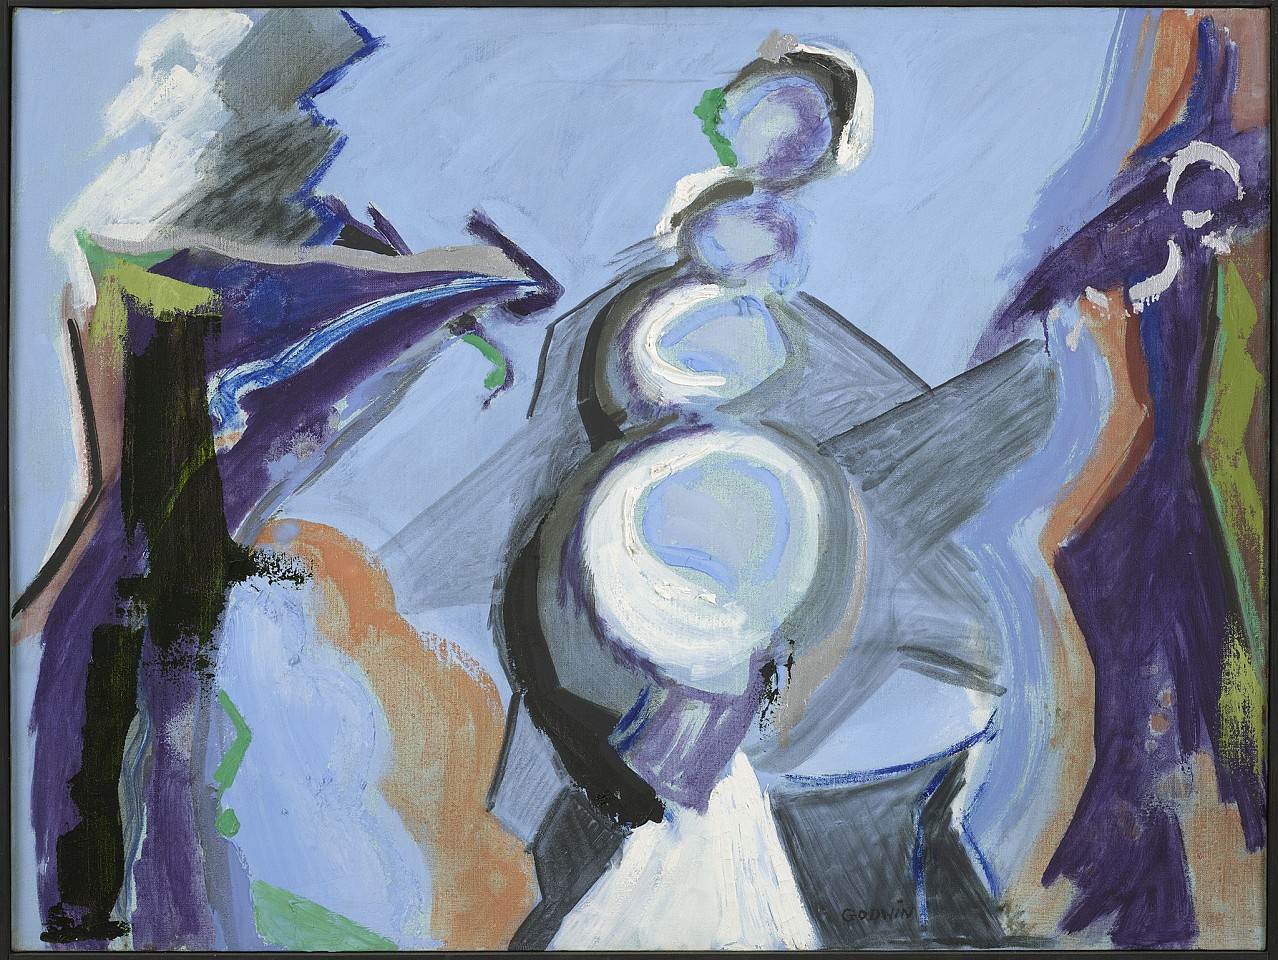 Judith Godwin, White Support | SOLD, 1988
Oil on canvas, 30 x 40 in. (76.2 x 101.6 cm)
GOD-00017